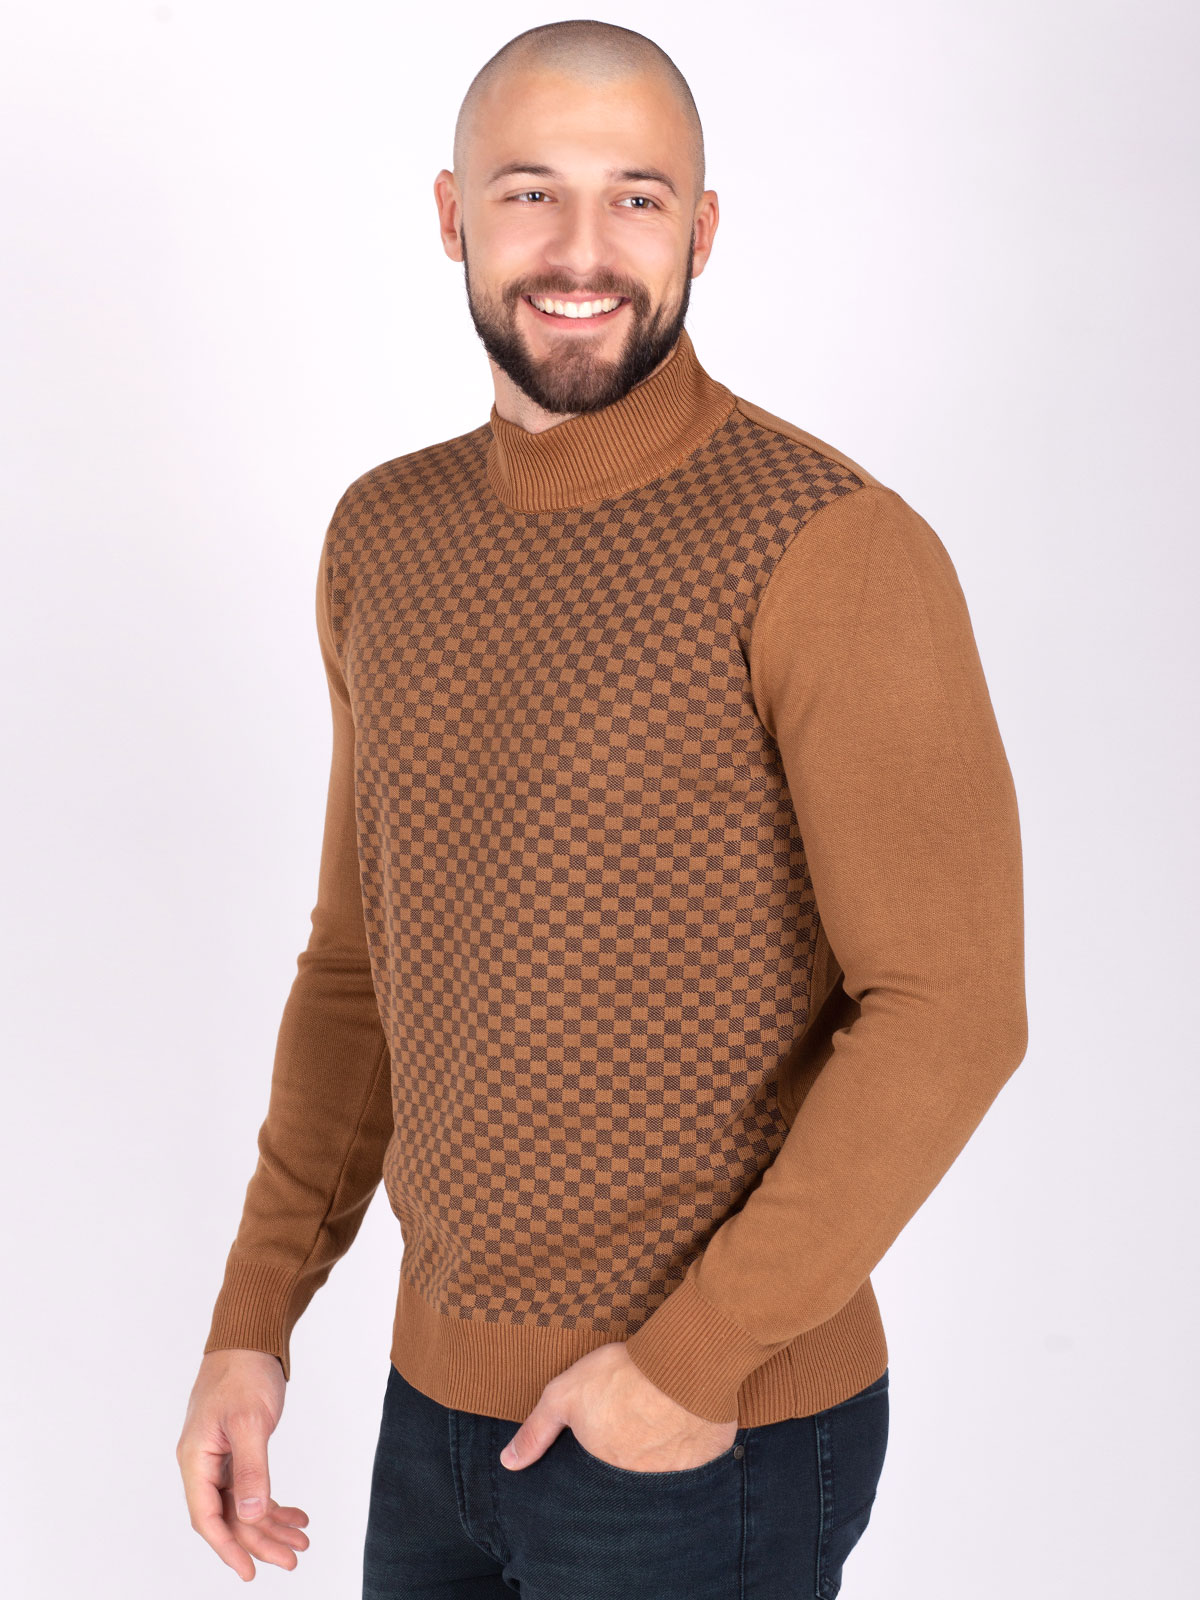 Polo shirt in brown with a checkered pat - 35303 € 38.81 img2